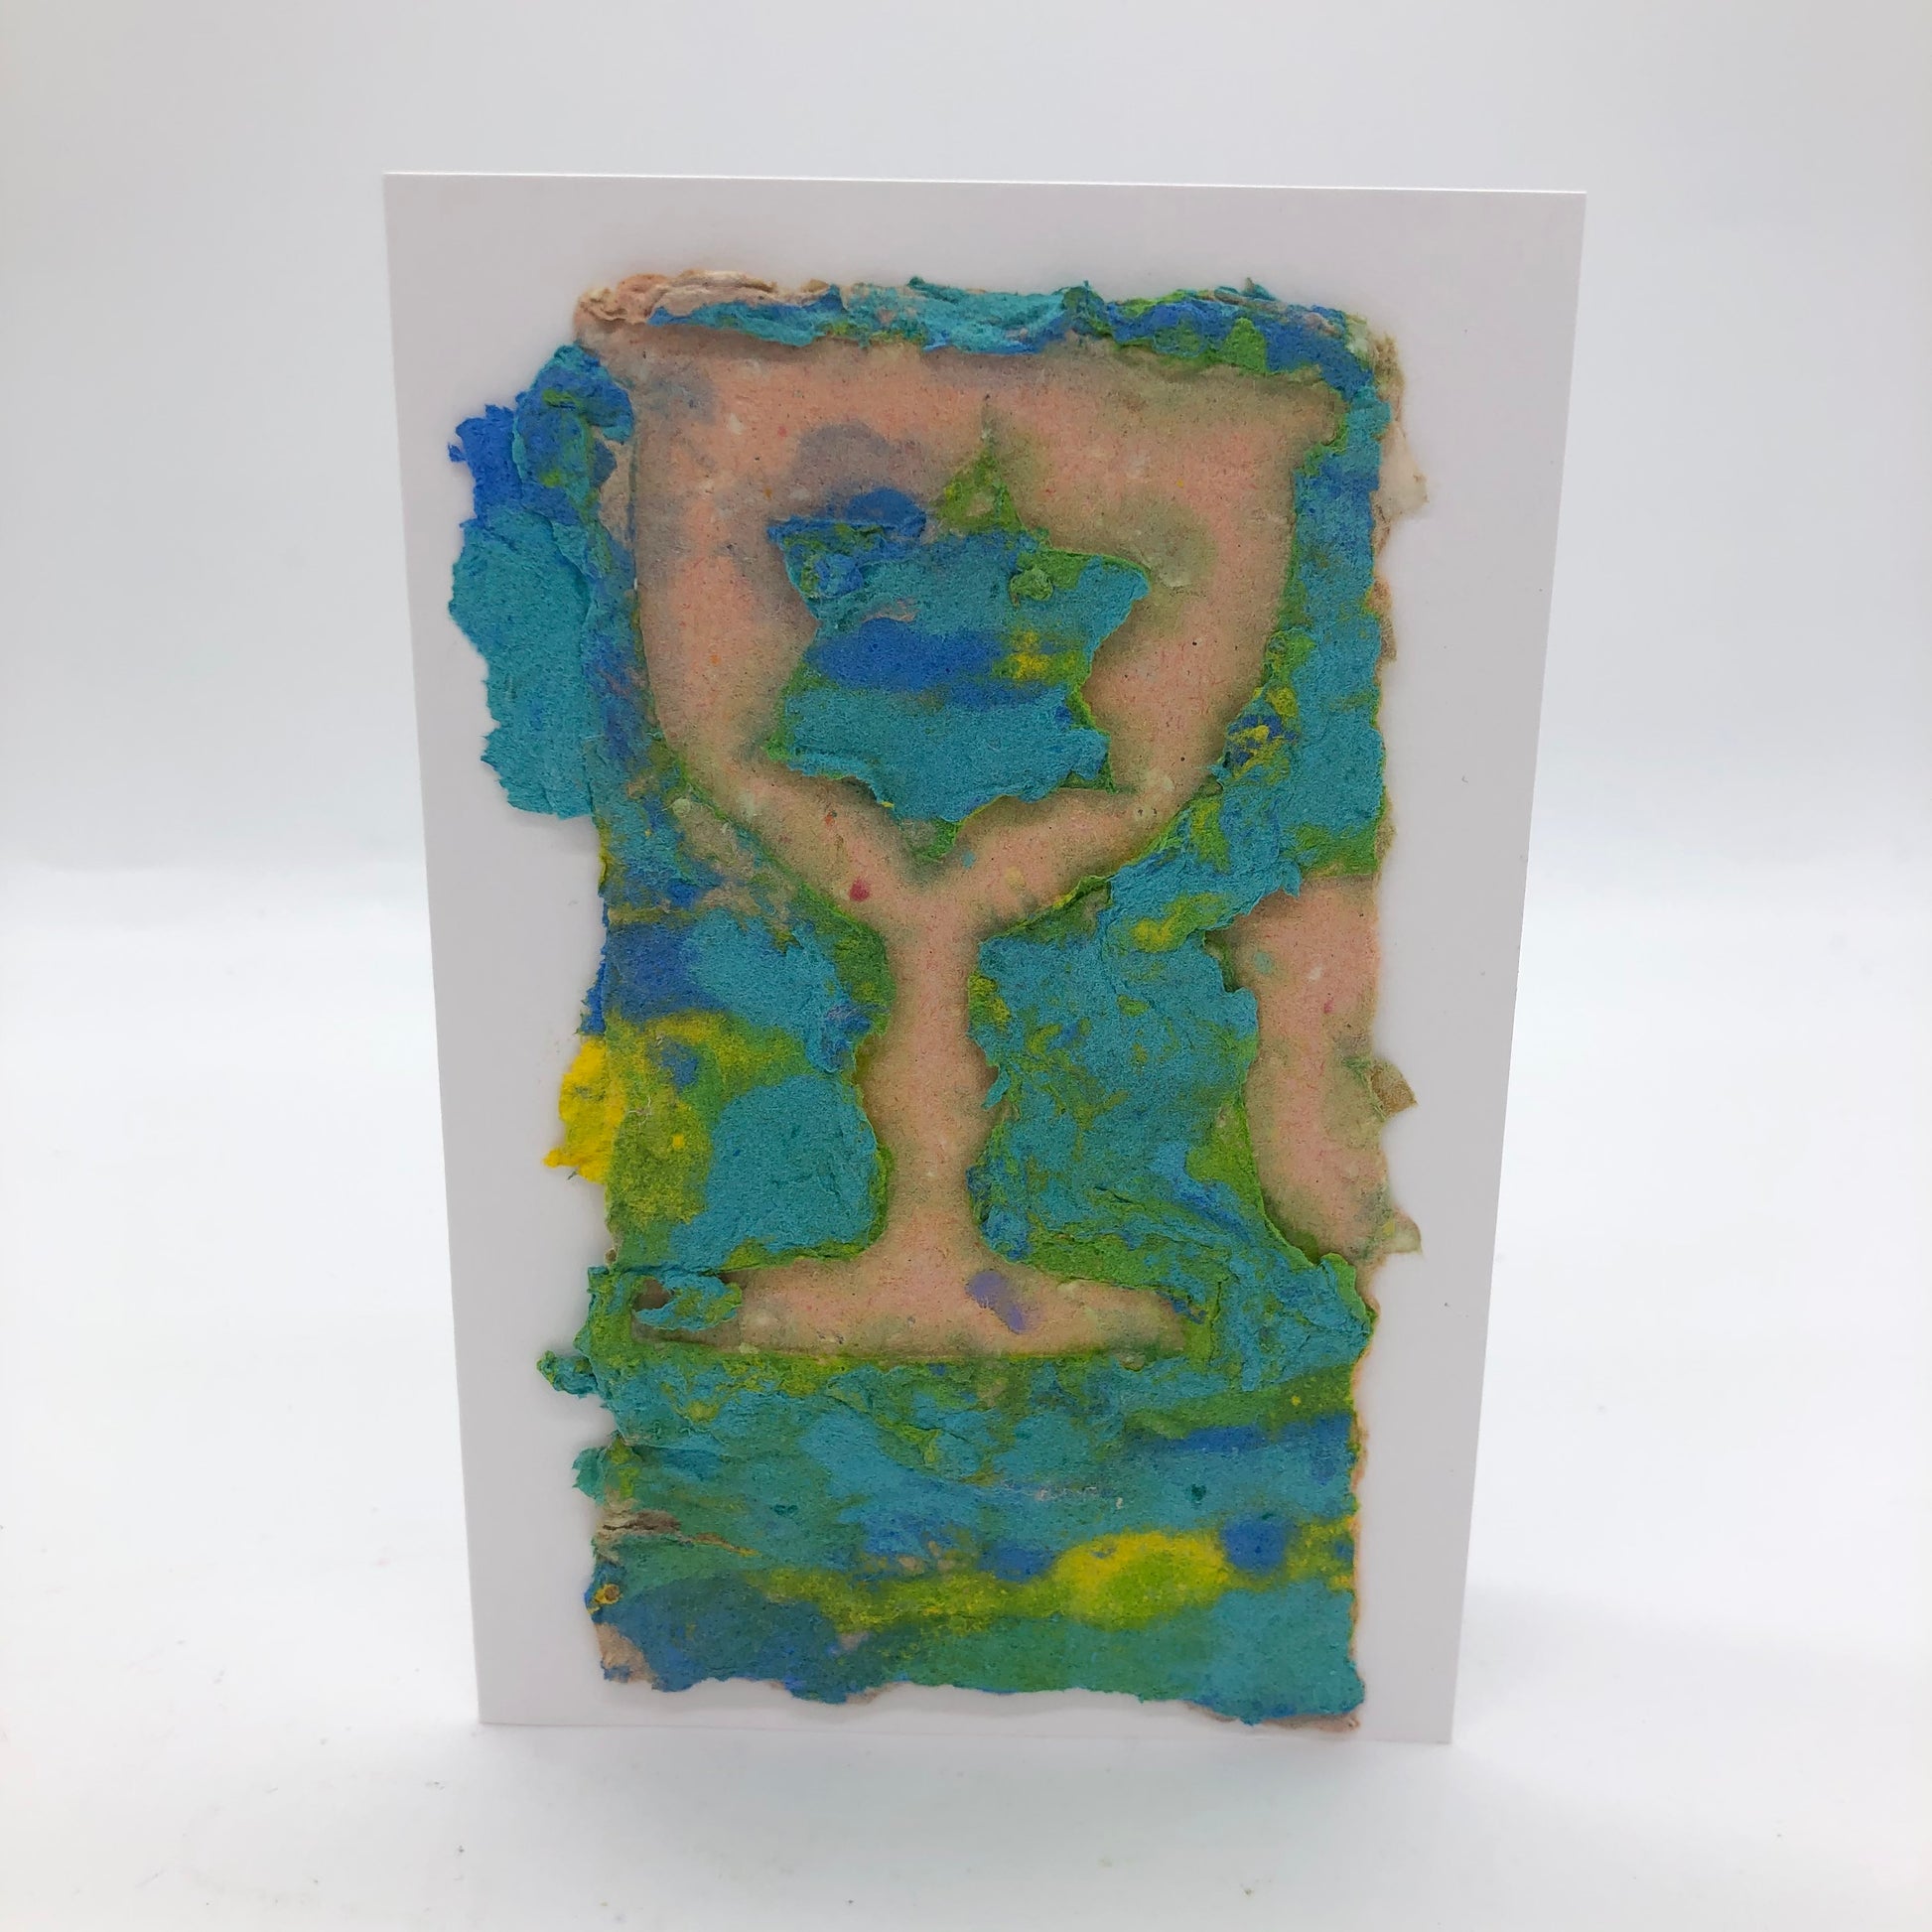 Handmade paper greeting card with white Kiddush cup and aqua/light blue Jewish star again aqua, yellow and light blue background